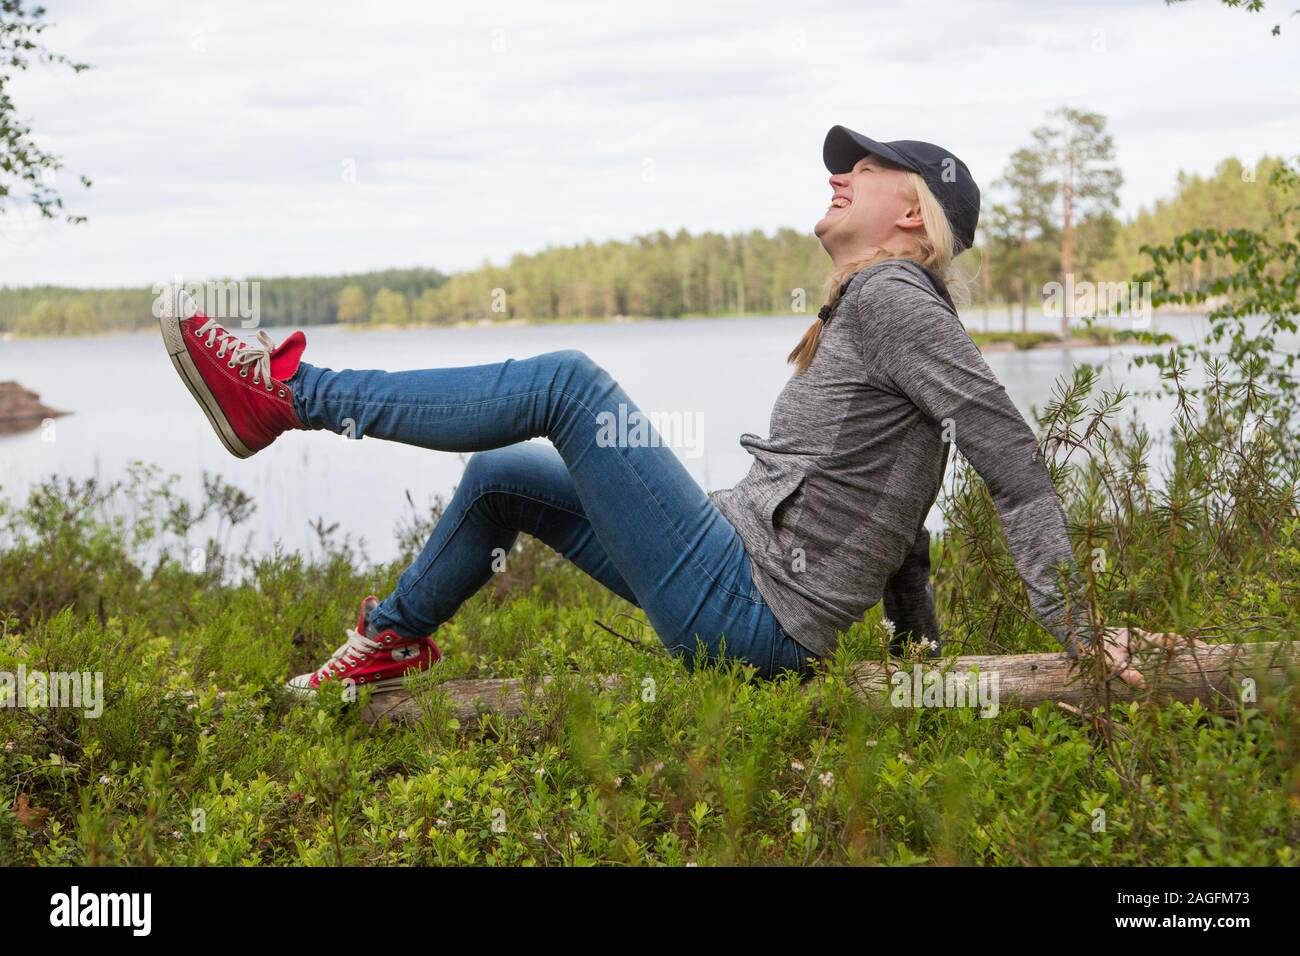 Woman in casual clothing sitting on a log by a lake dressed in converse trainers laughing Stock Photo